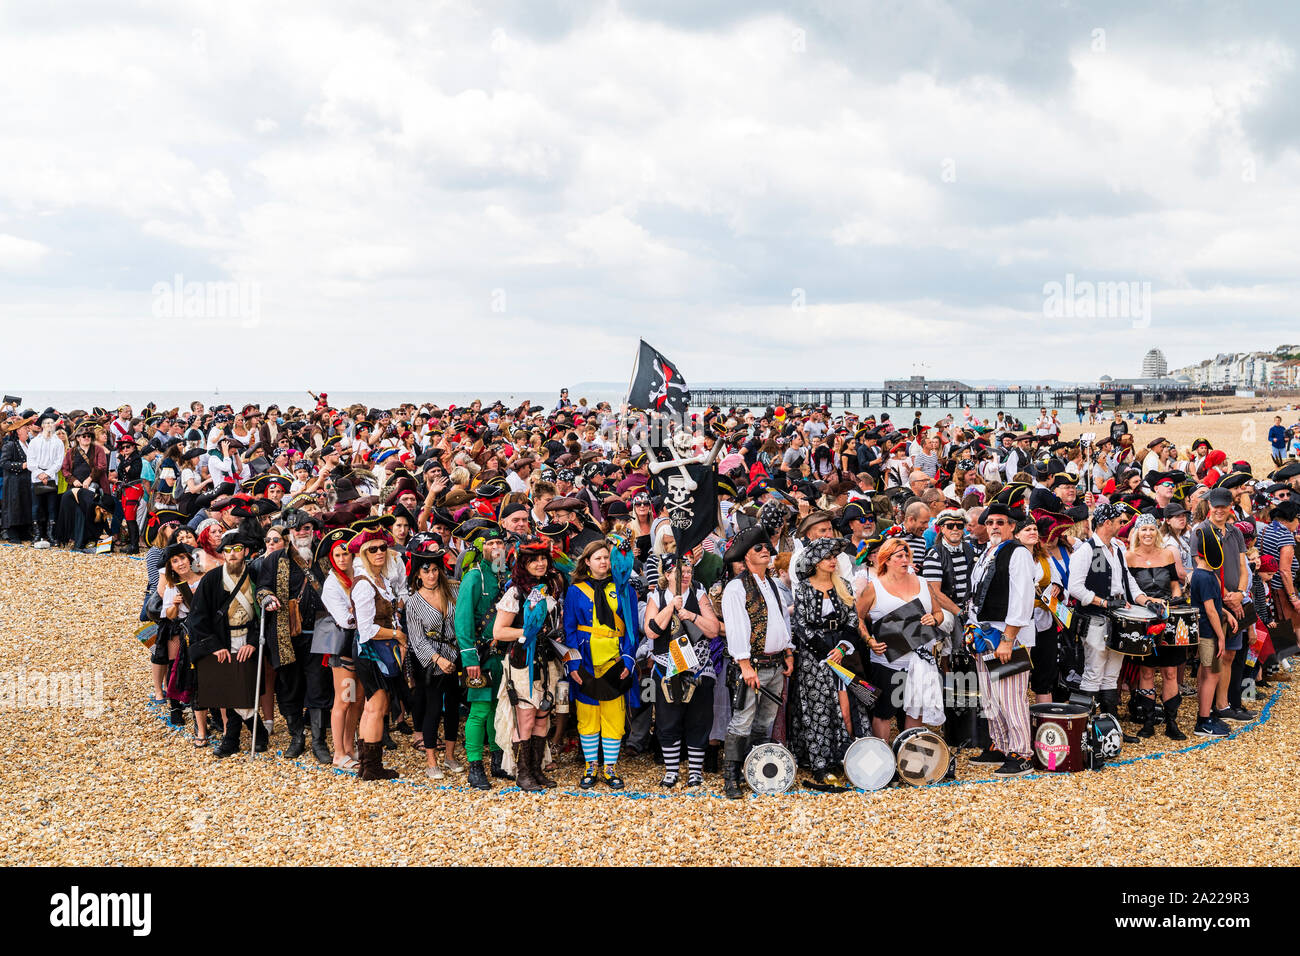 Pirate Day in Hastings, UK. Thousands of people dressed as pirates crowded into designated sectors on the beach for the world record attempt. Stock Photo